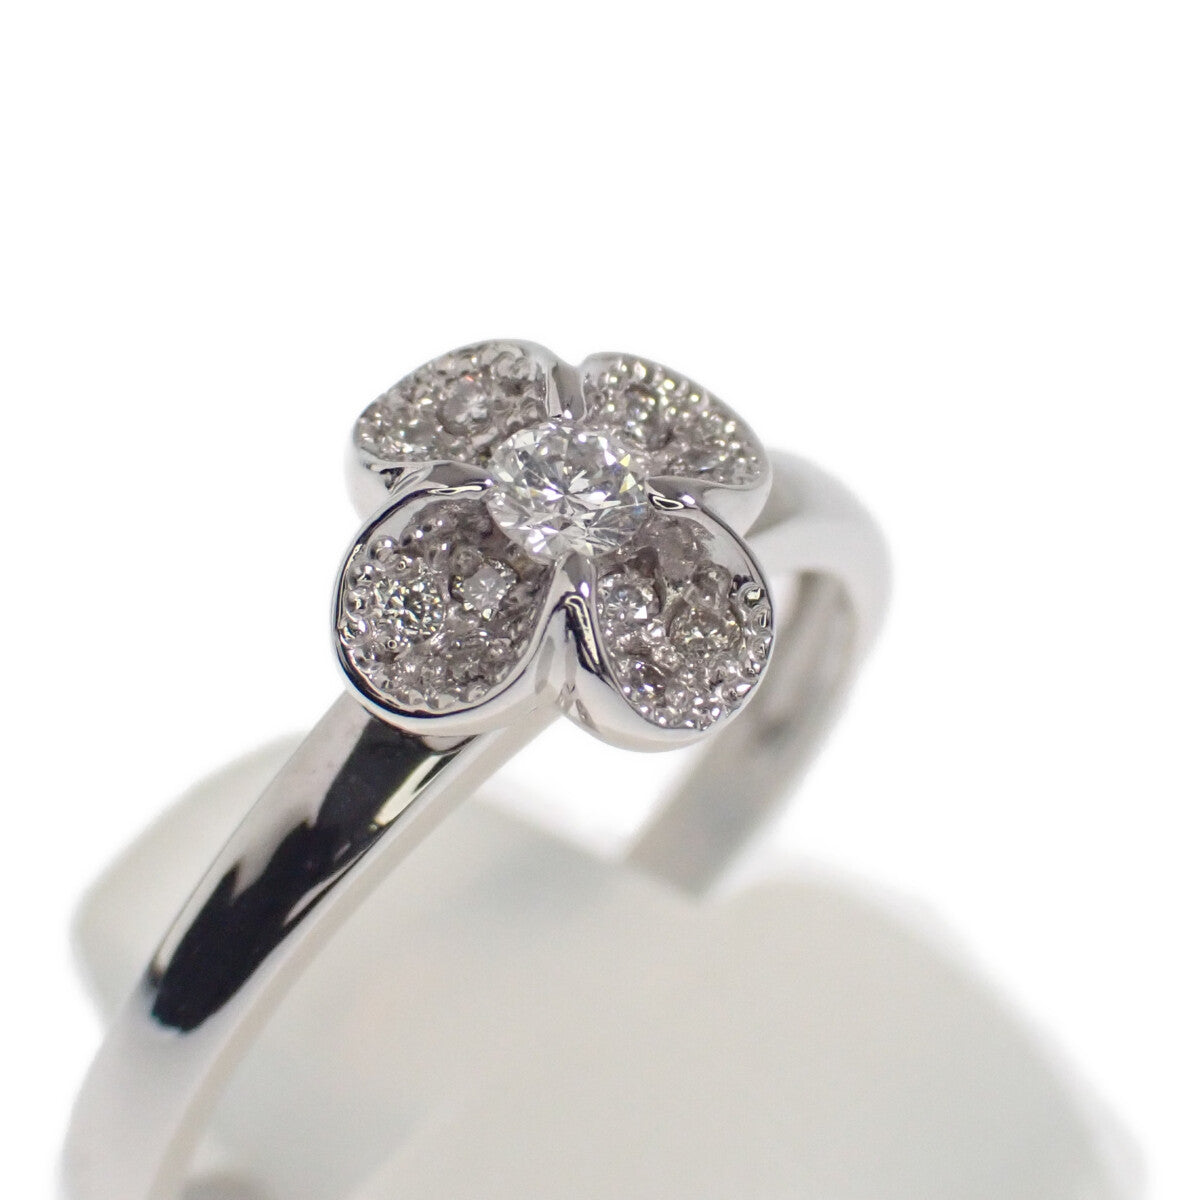 LuxUness  Vendome Flower Motif Ring in K18 White Gold with Diamond 0.13ct for Ladies - Silver in Excellent condition